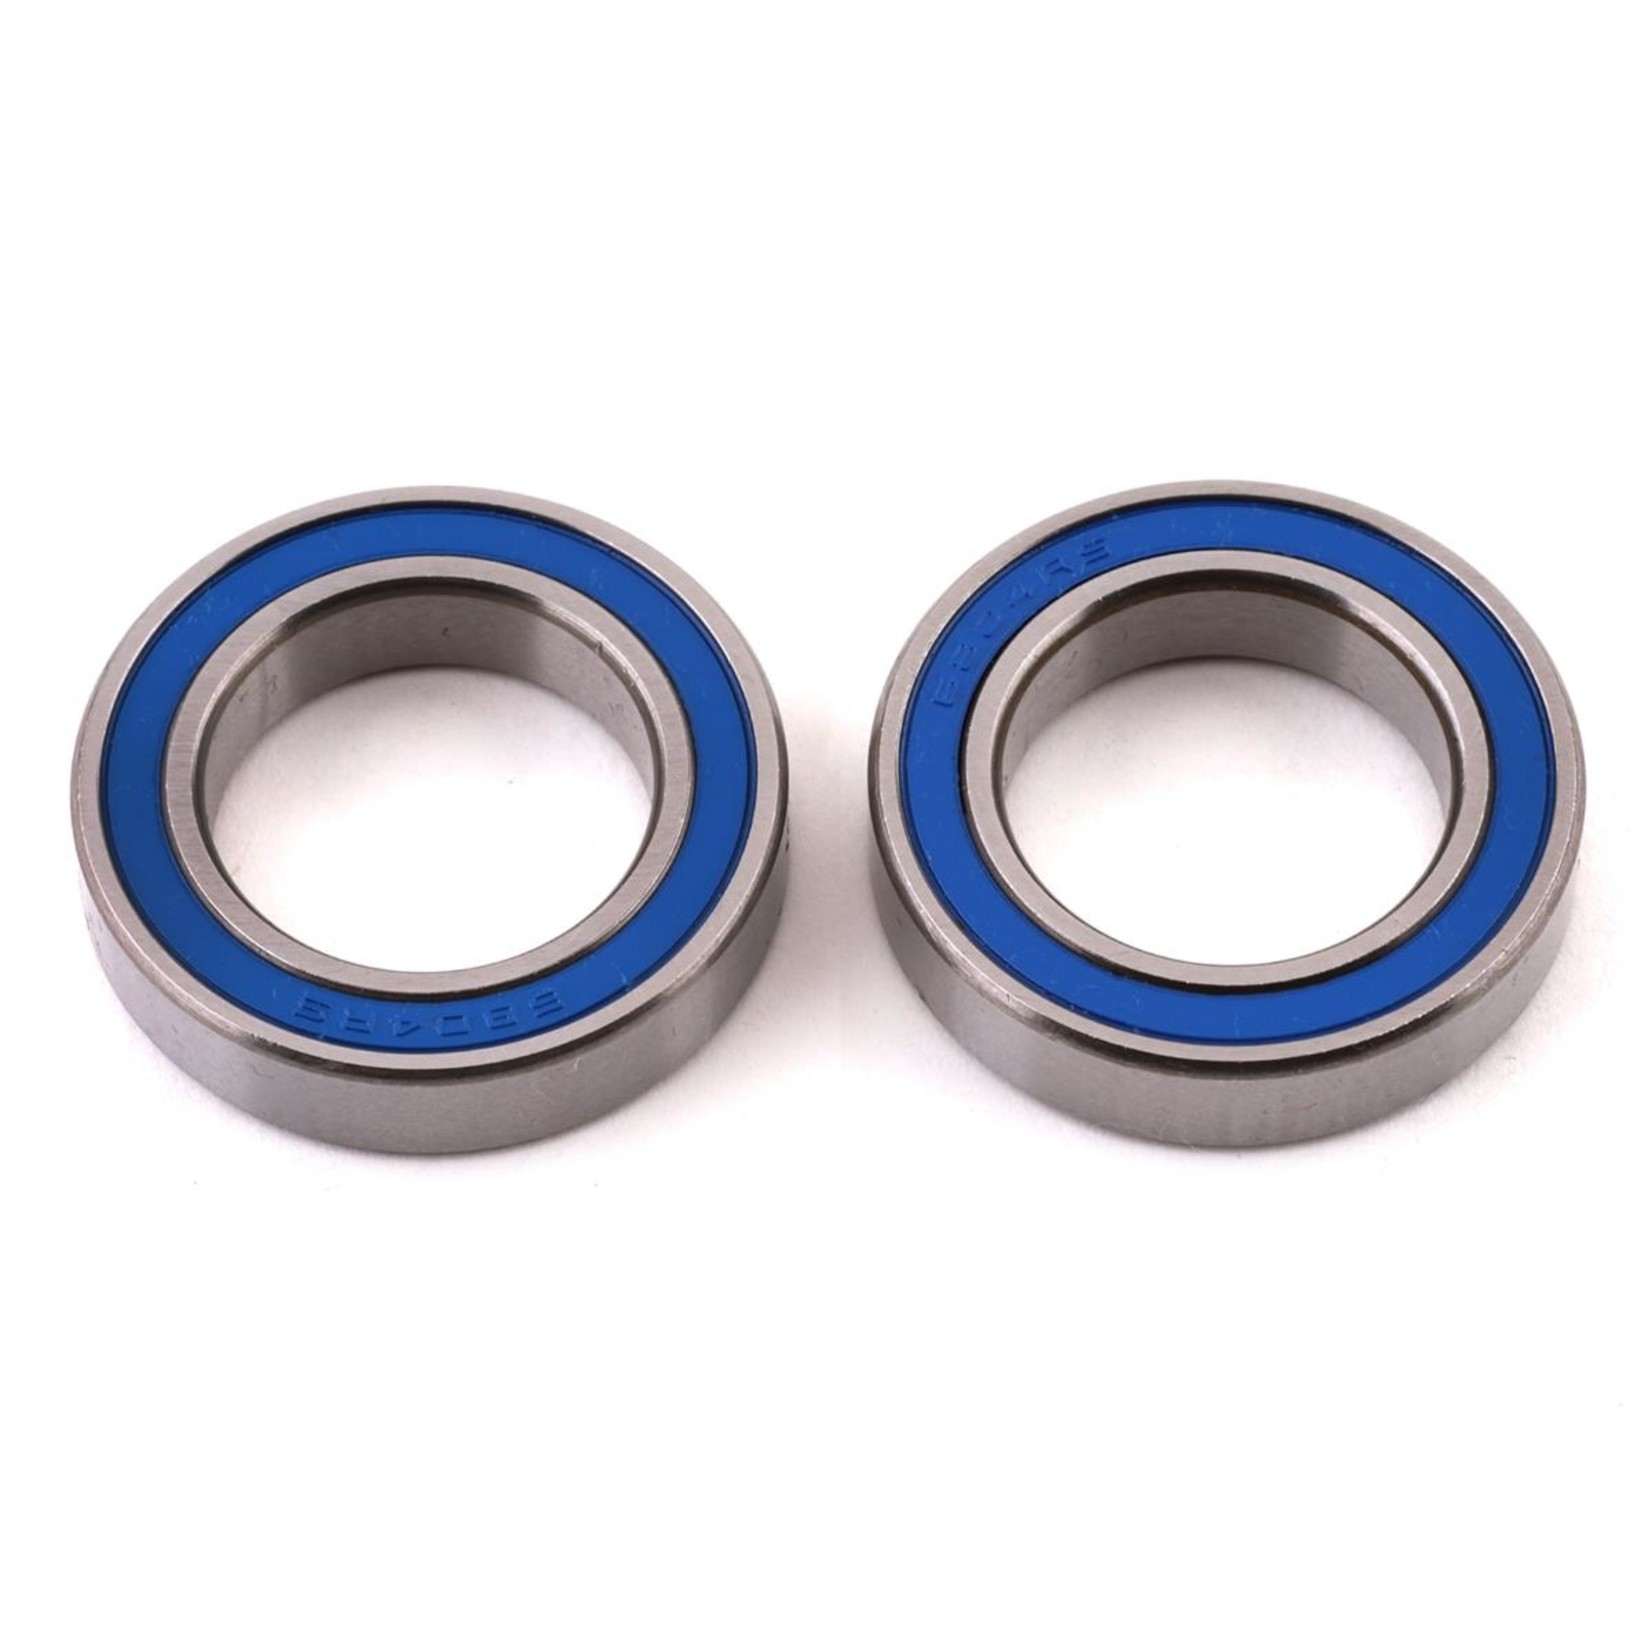 RPM Replacement Oversized Inner Bearing (2): Rear Carriers X-Maxx